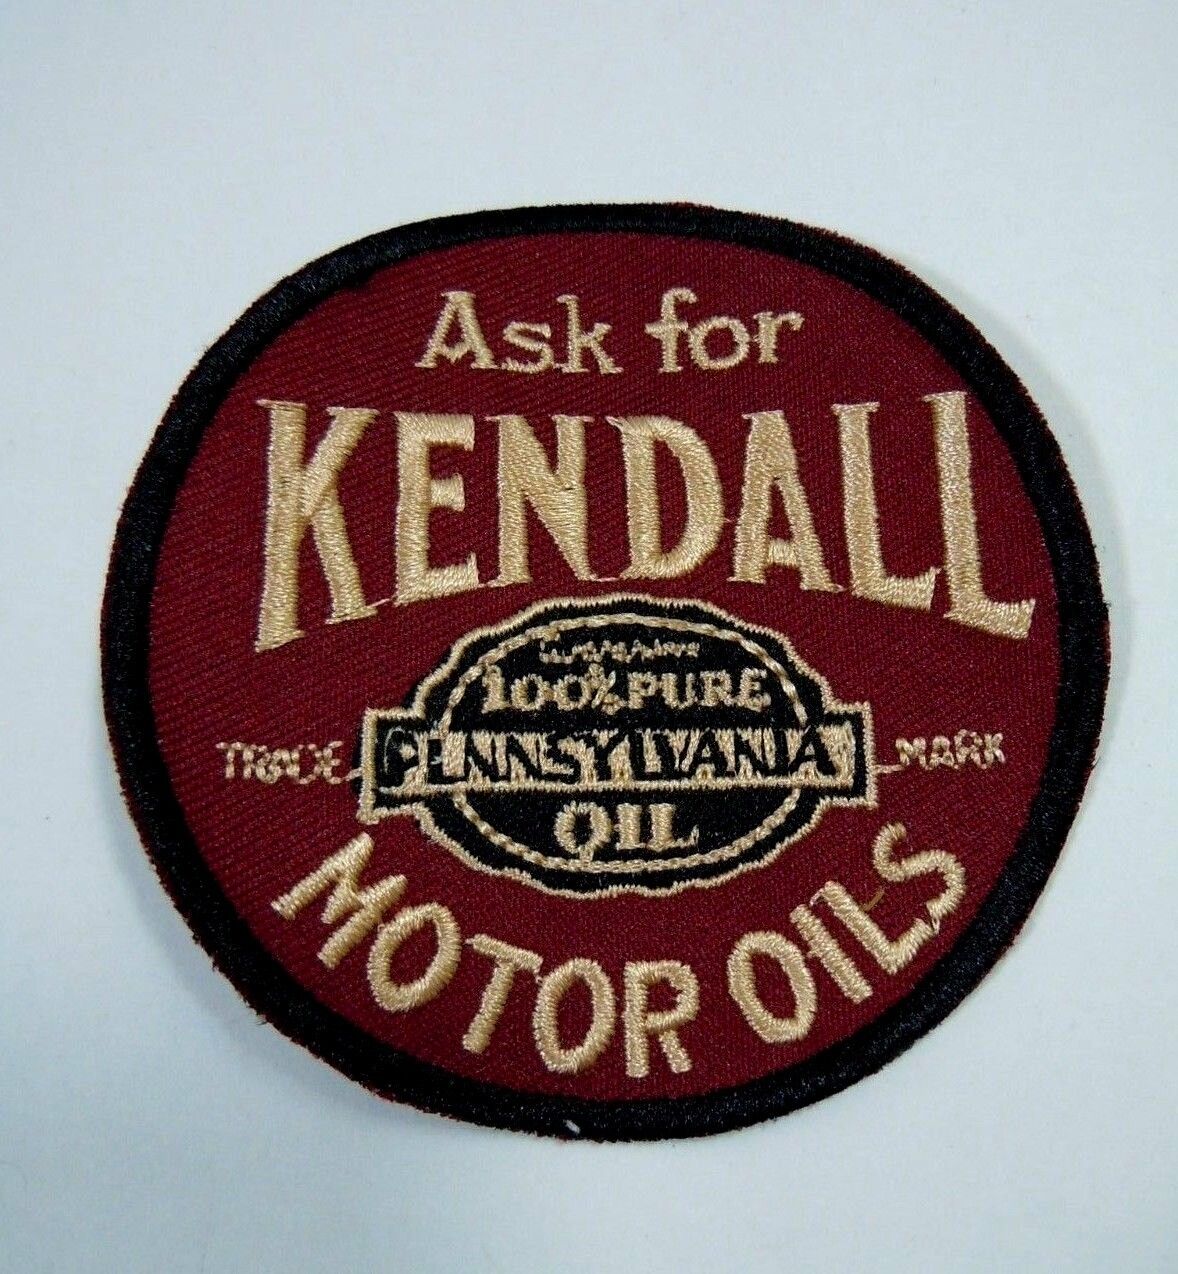 Vintage Ask For KENDALL Motor Oils Embroidered Sew On Uniform-Jacket Patch 3" Kendall